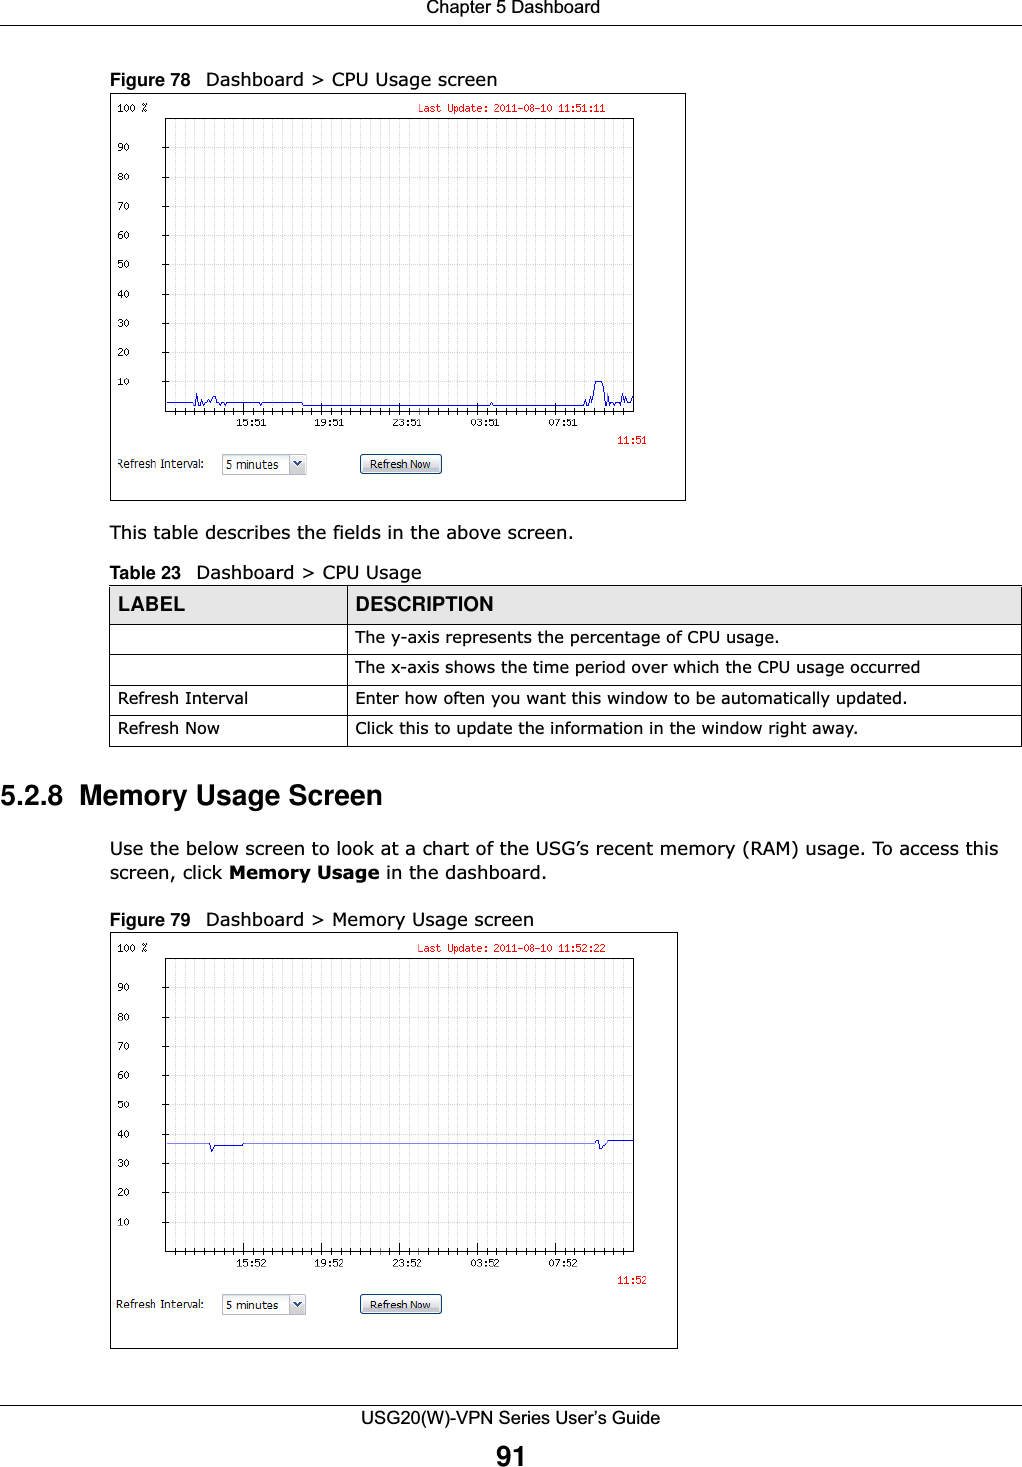  Chapter 5 DashboardUSG20(W)-VPN Series User’s Guide91Figure 78   Dashboard &gt; CPU Usage screen This table describes the fields in the above screen.5.2.8  Memory Usage ScreenUse the below screen to look at a chart of the USG’s recent memory (RAM) usage. To access this screen, click Memory Usage in the dashboard.  Figure 79   Dashboard &gt; Memory Usage screen  Table 23   Dashboard &gt; CPU UsageLABEL DESCRIPTIONThe y-axis represents the percentage of CPU usage.The x-axis shows the time period over which the CPU usage occurredRefresh Interval Enter how often you want this window to be automatically updated.Refresh Now Click this to update the information in the window right away. 